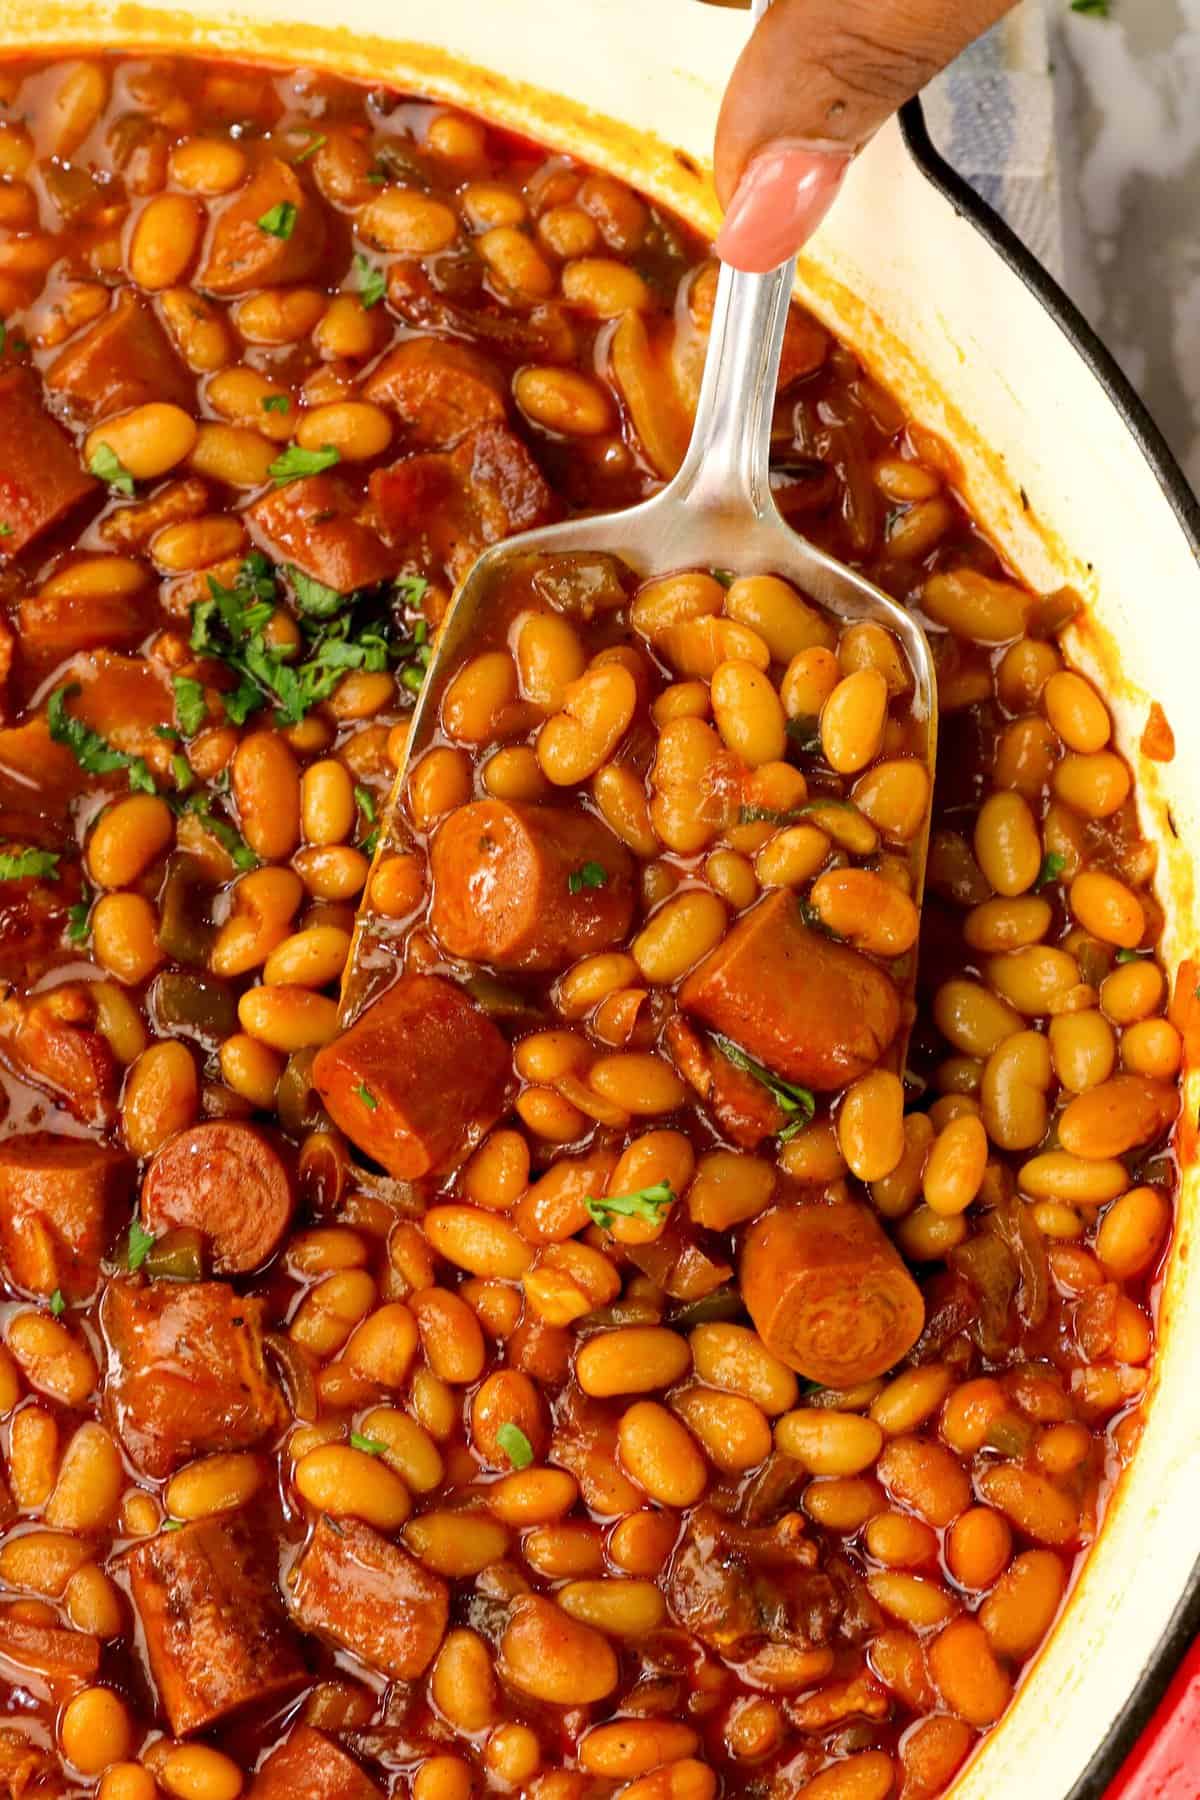 Serving up a scoop of frank and beans for a kid-approved meal